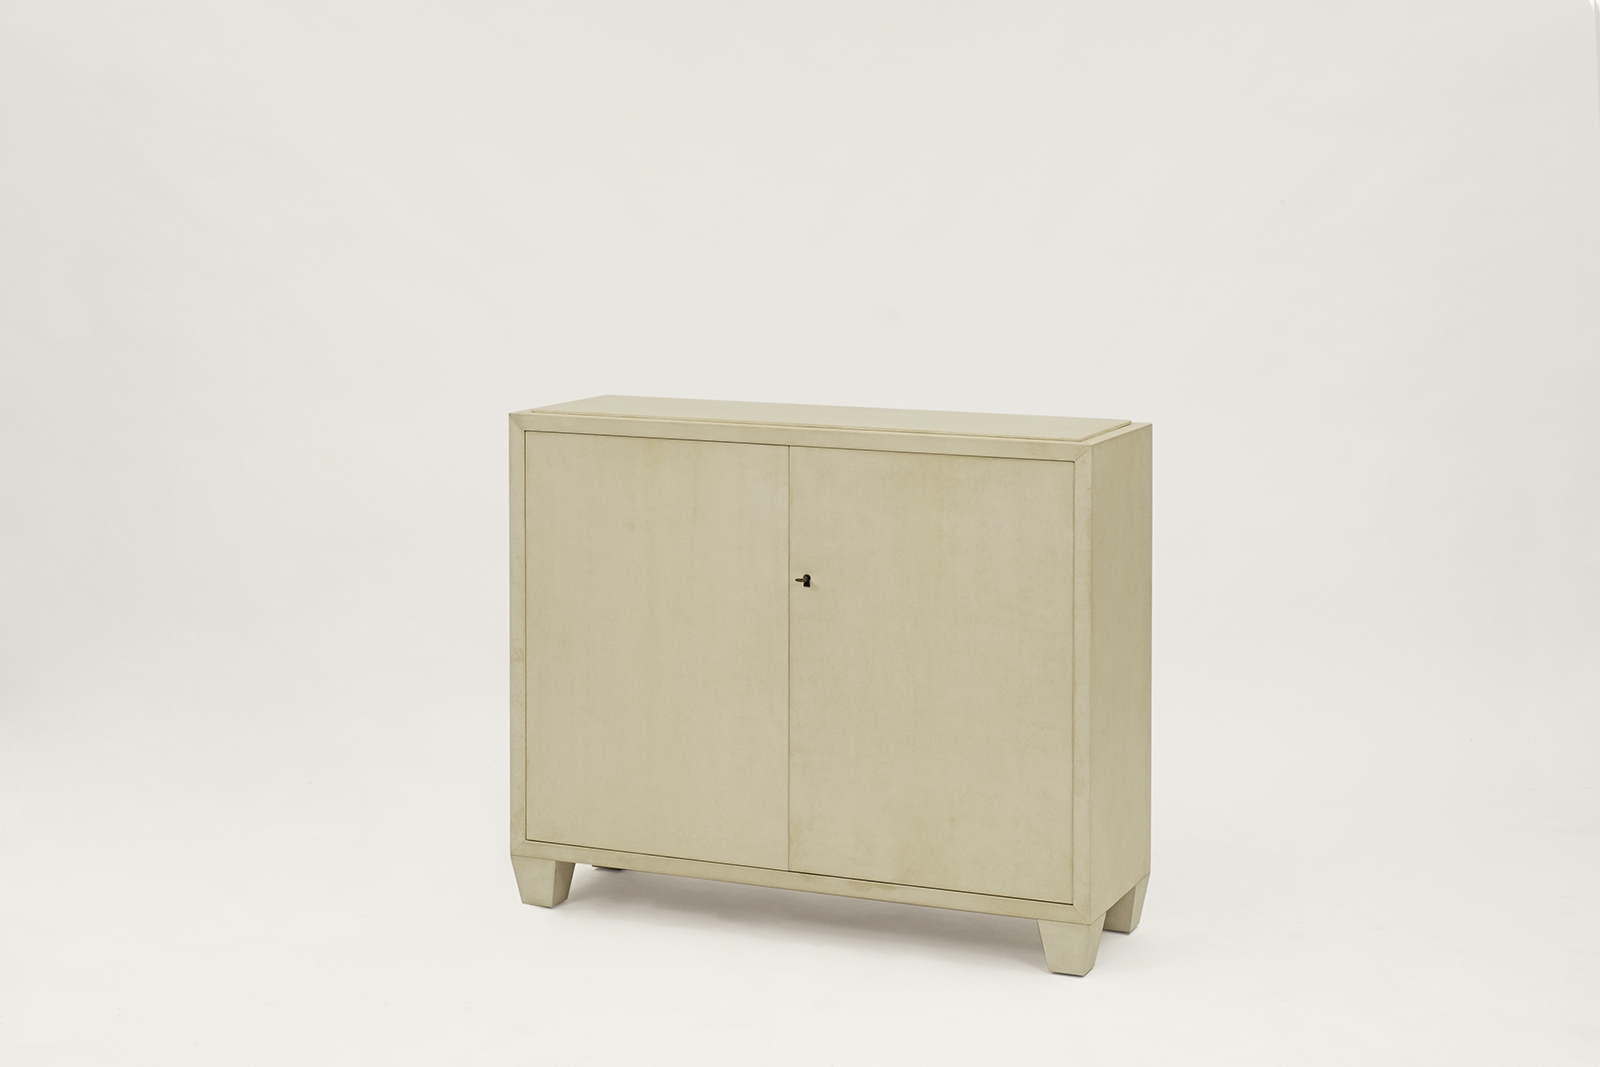 J.m. Frank Inspired Tv Lift Cabinet In Goat Skin Parchment